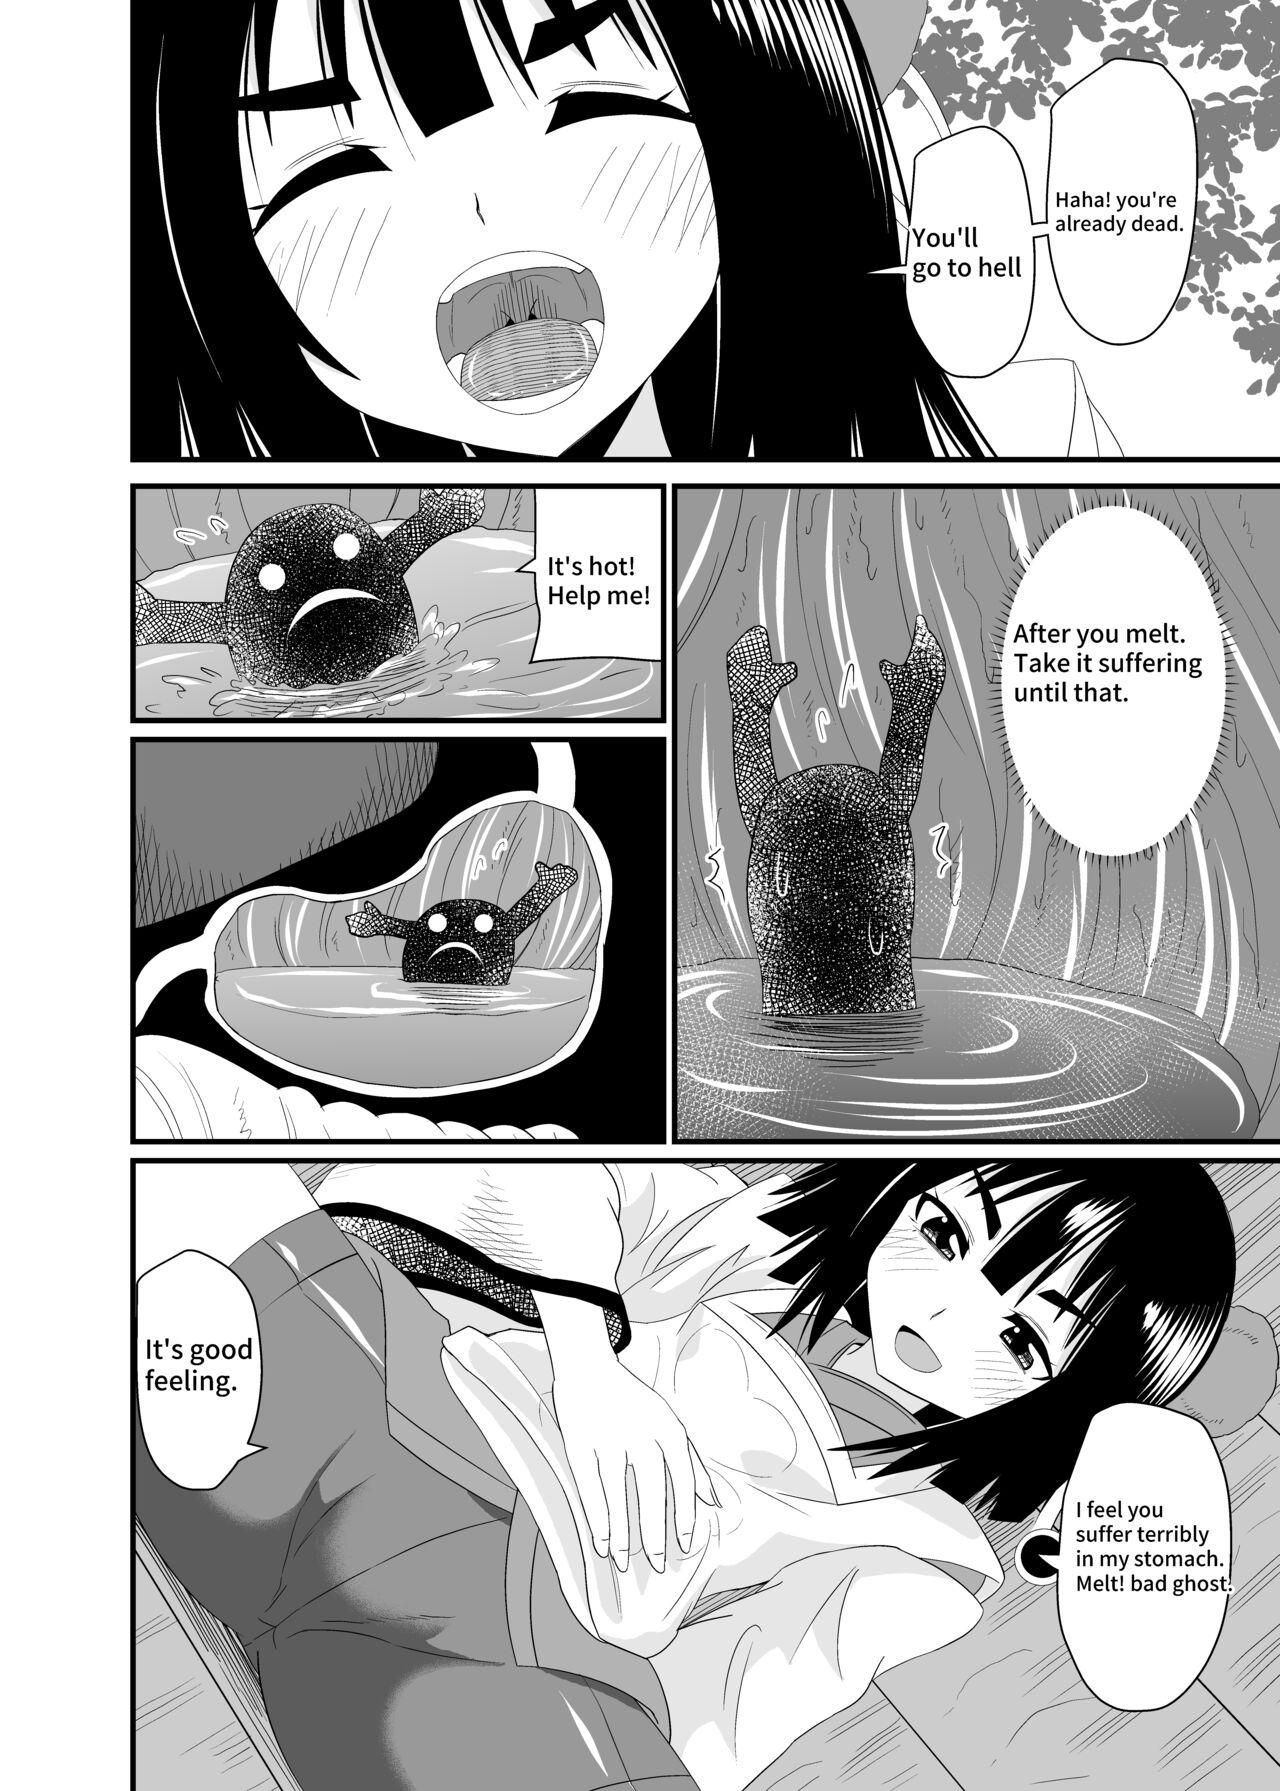 Girlsfucking Exorcism by swallowing the snake god - Original Camgirl - Page 11